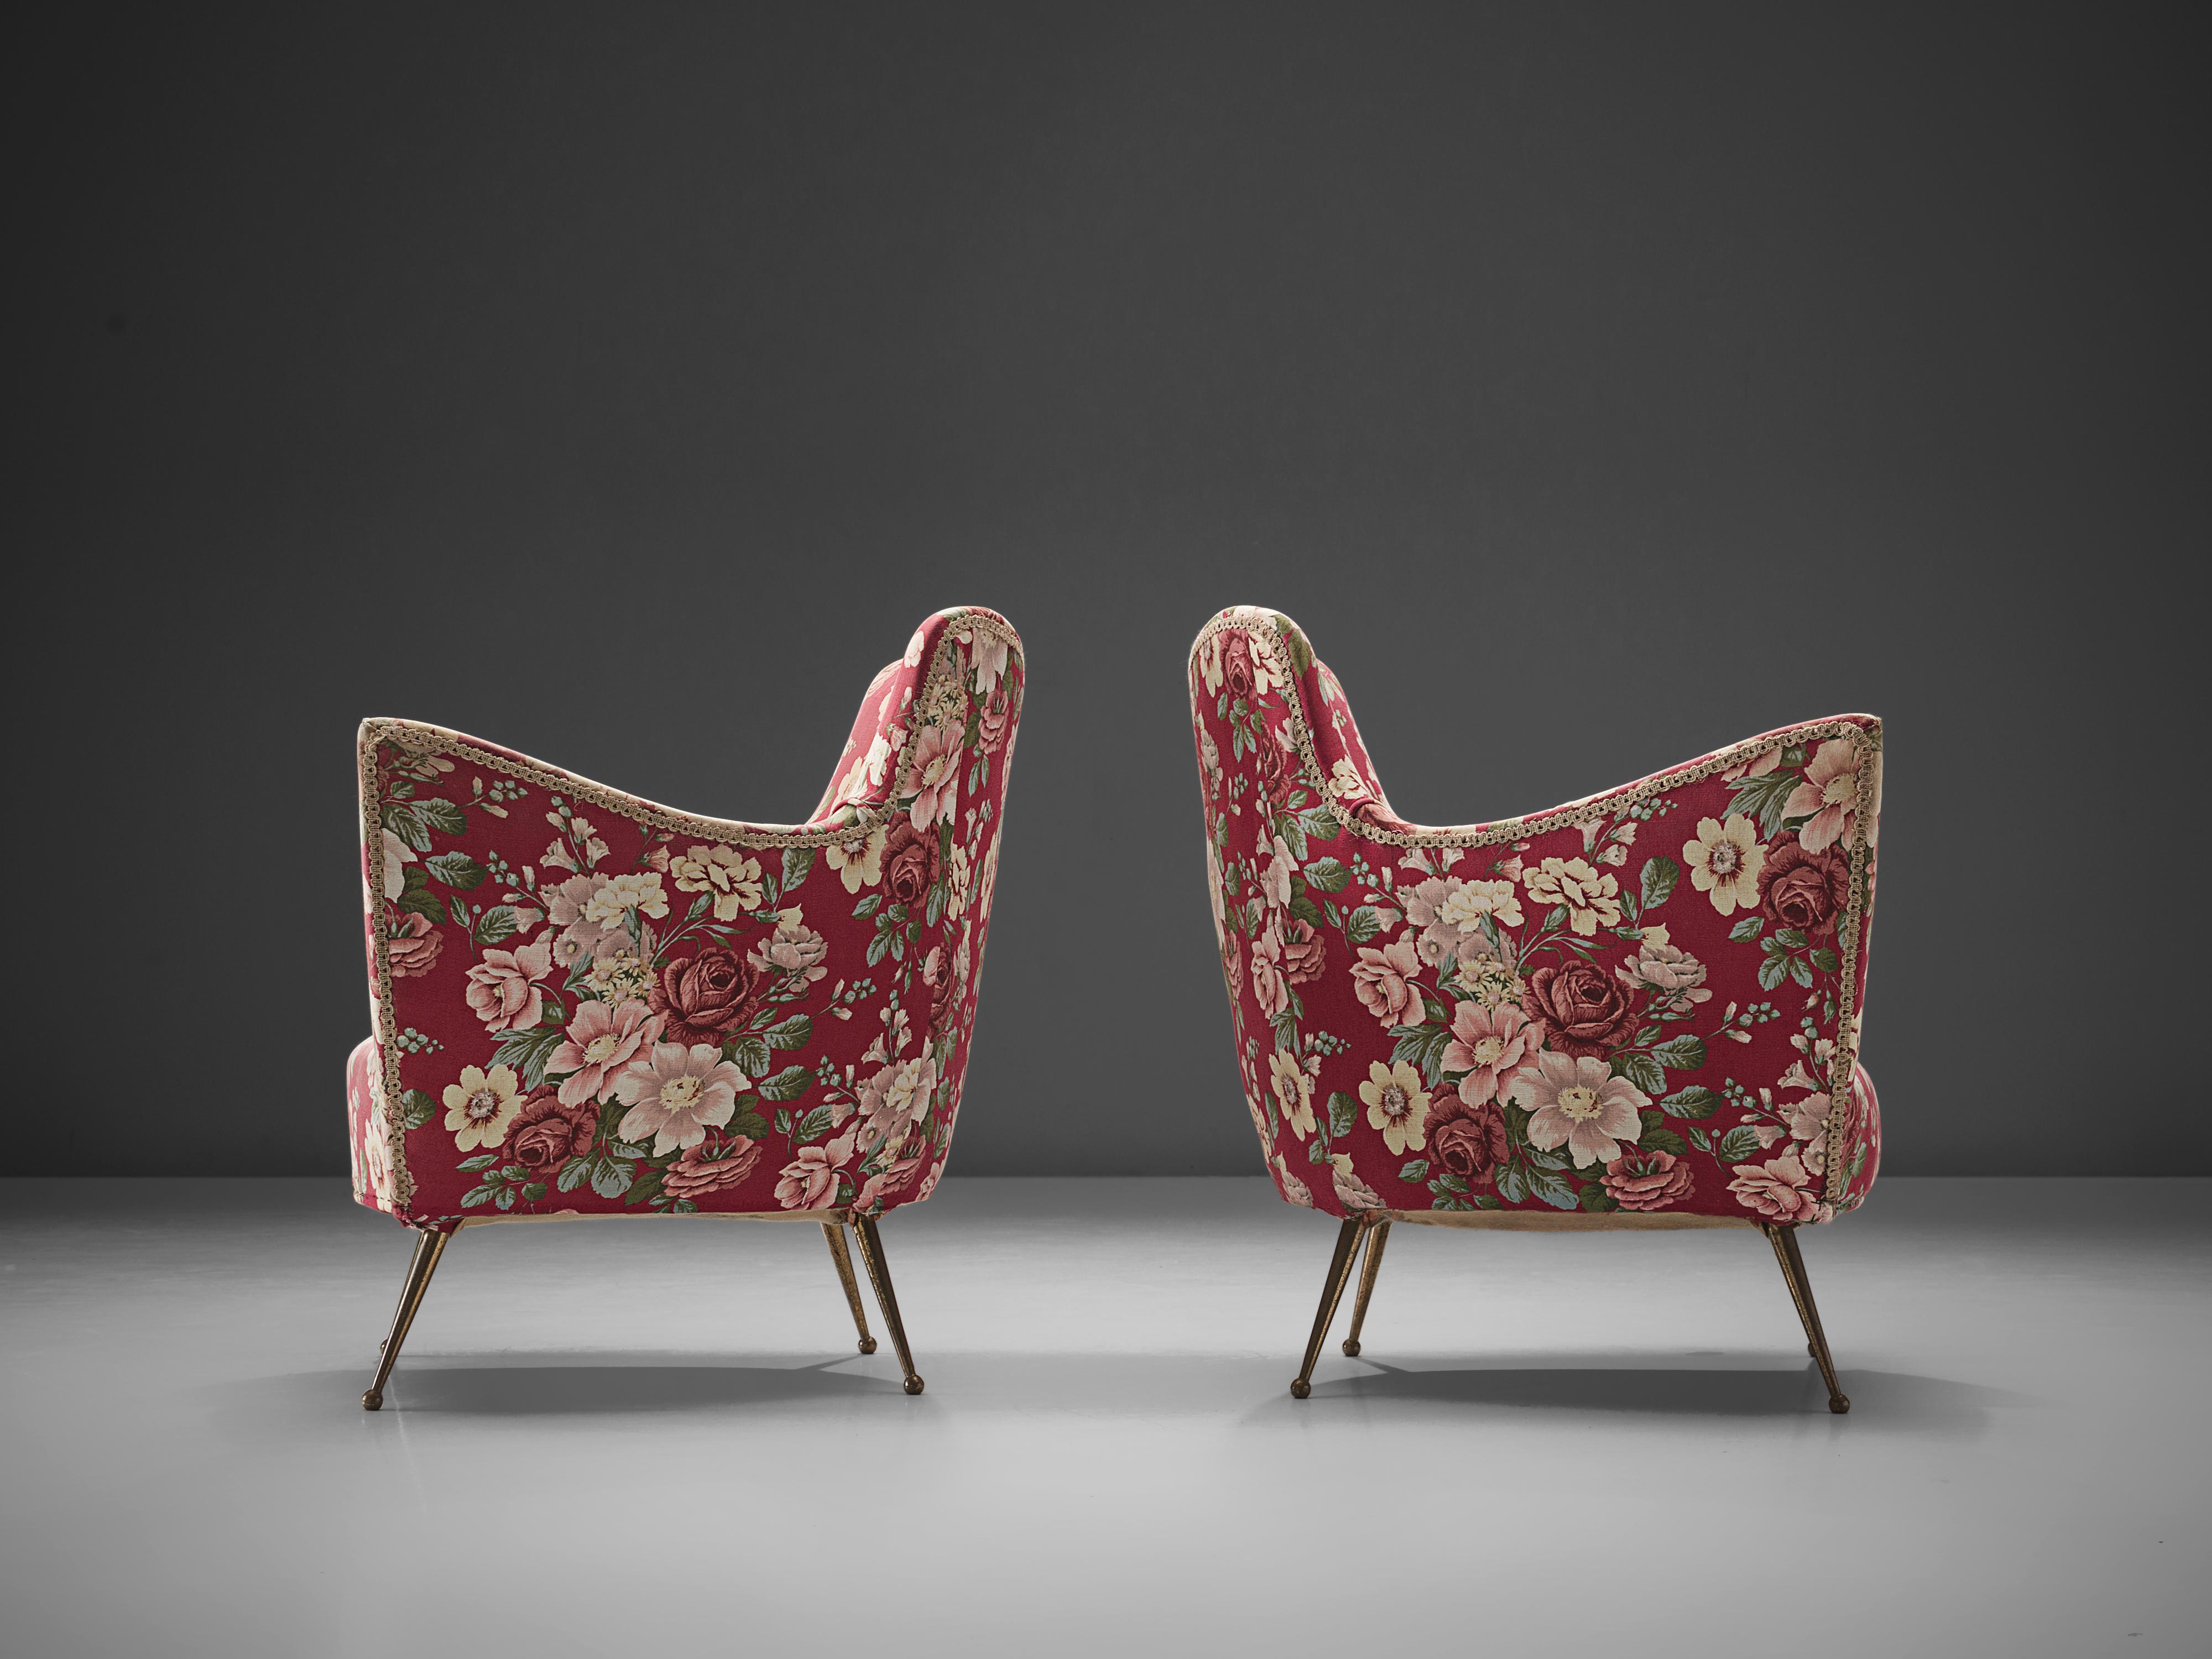 Brass Italian Lounge Chairs with Red Floral Upholstery